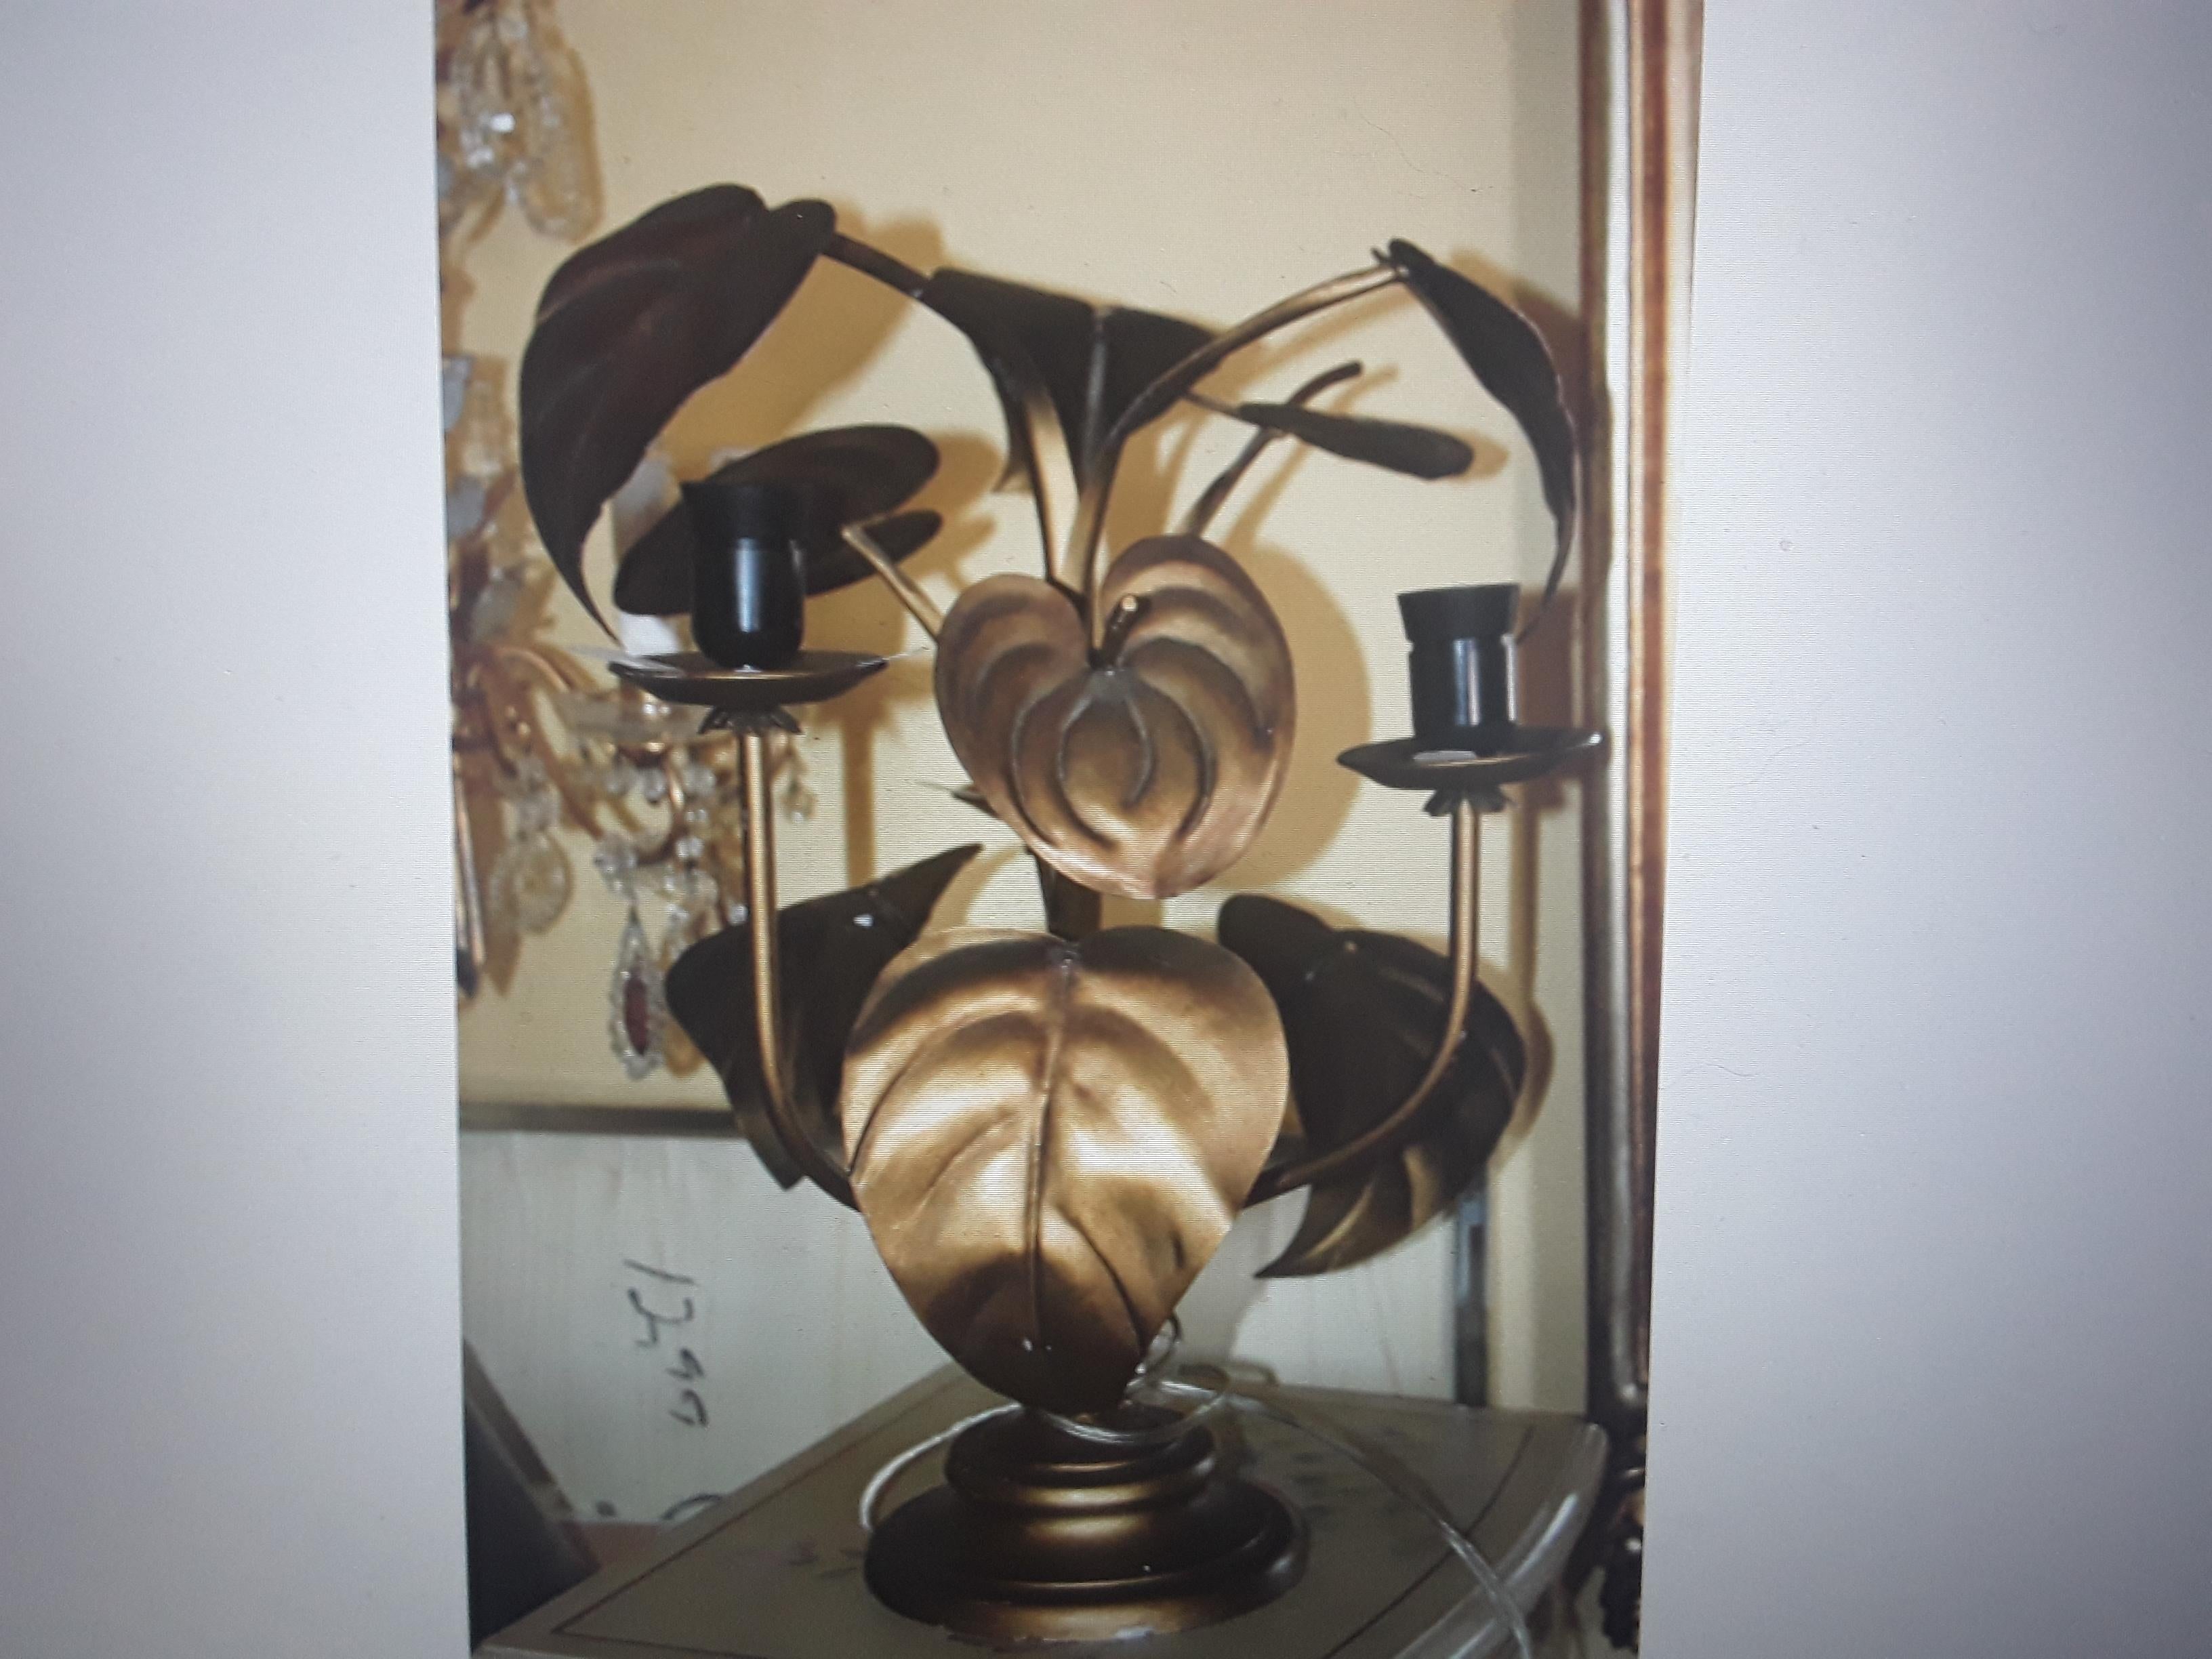 1950's Italian Mid Century Modern Gilt Metal Anthurium Table Lamp attrib. Tomasso Barbi. This is a beautiful table lamp choice.